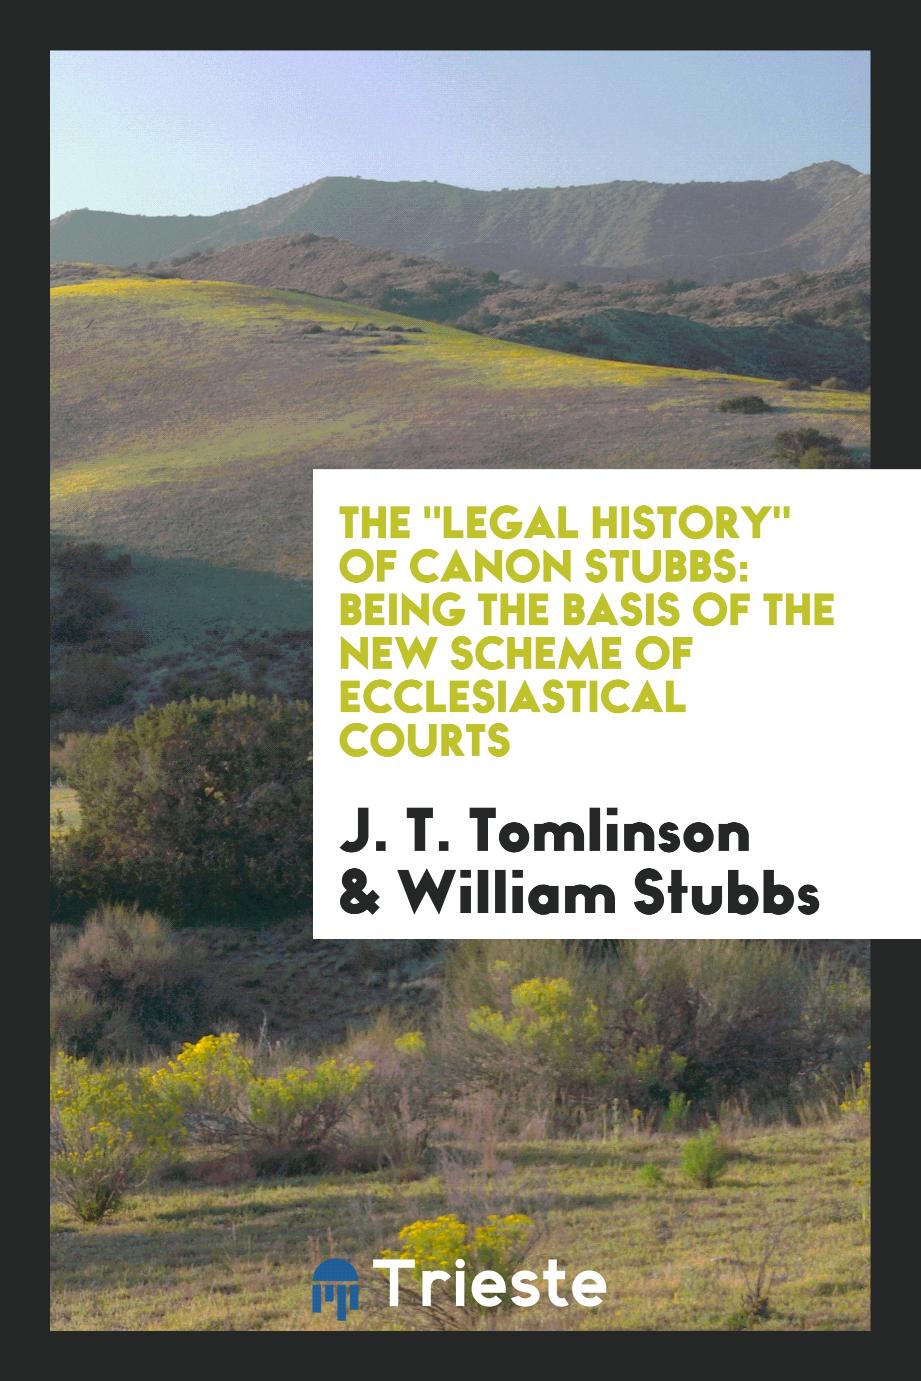 The "Legal History" of Canon Stubbs: Being the Basis of the New Scheme of Ecclesiastical Courts